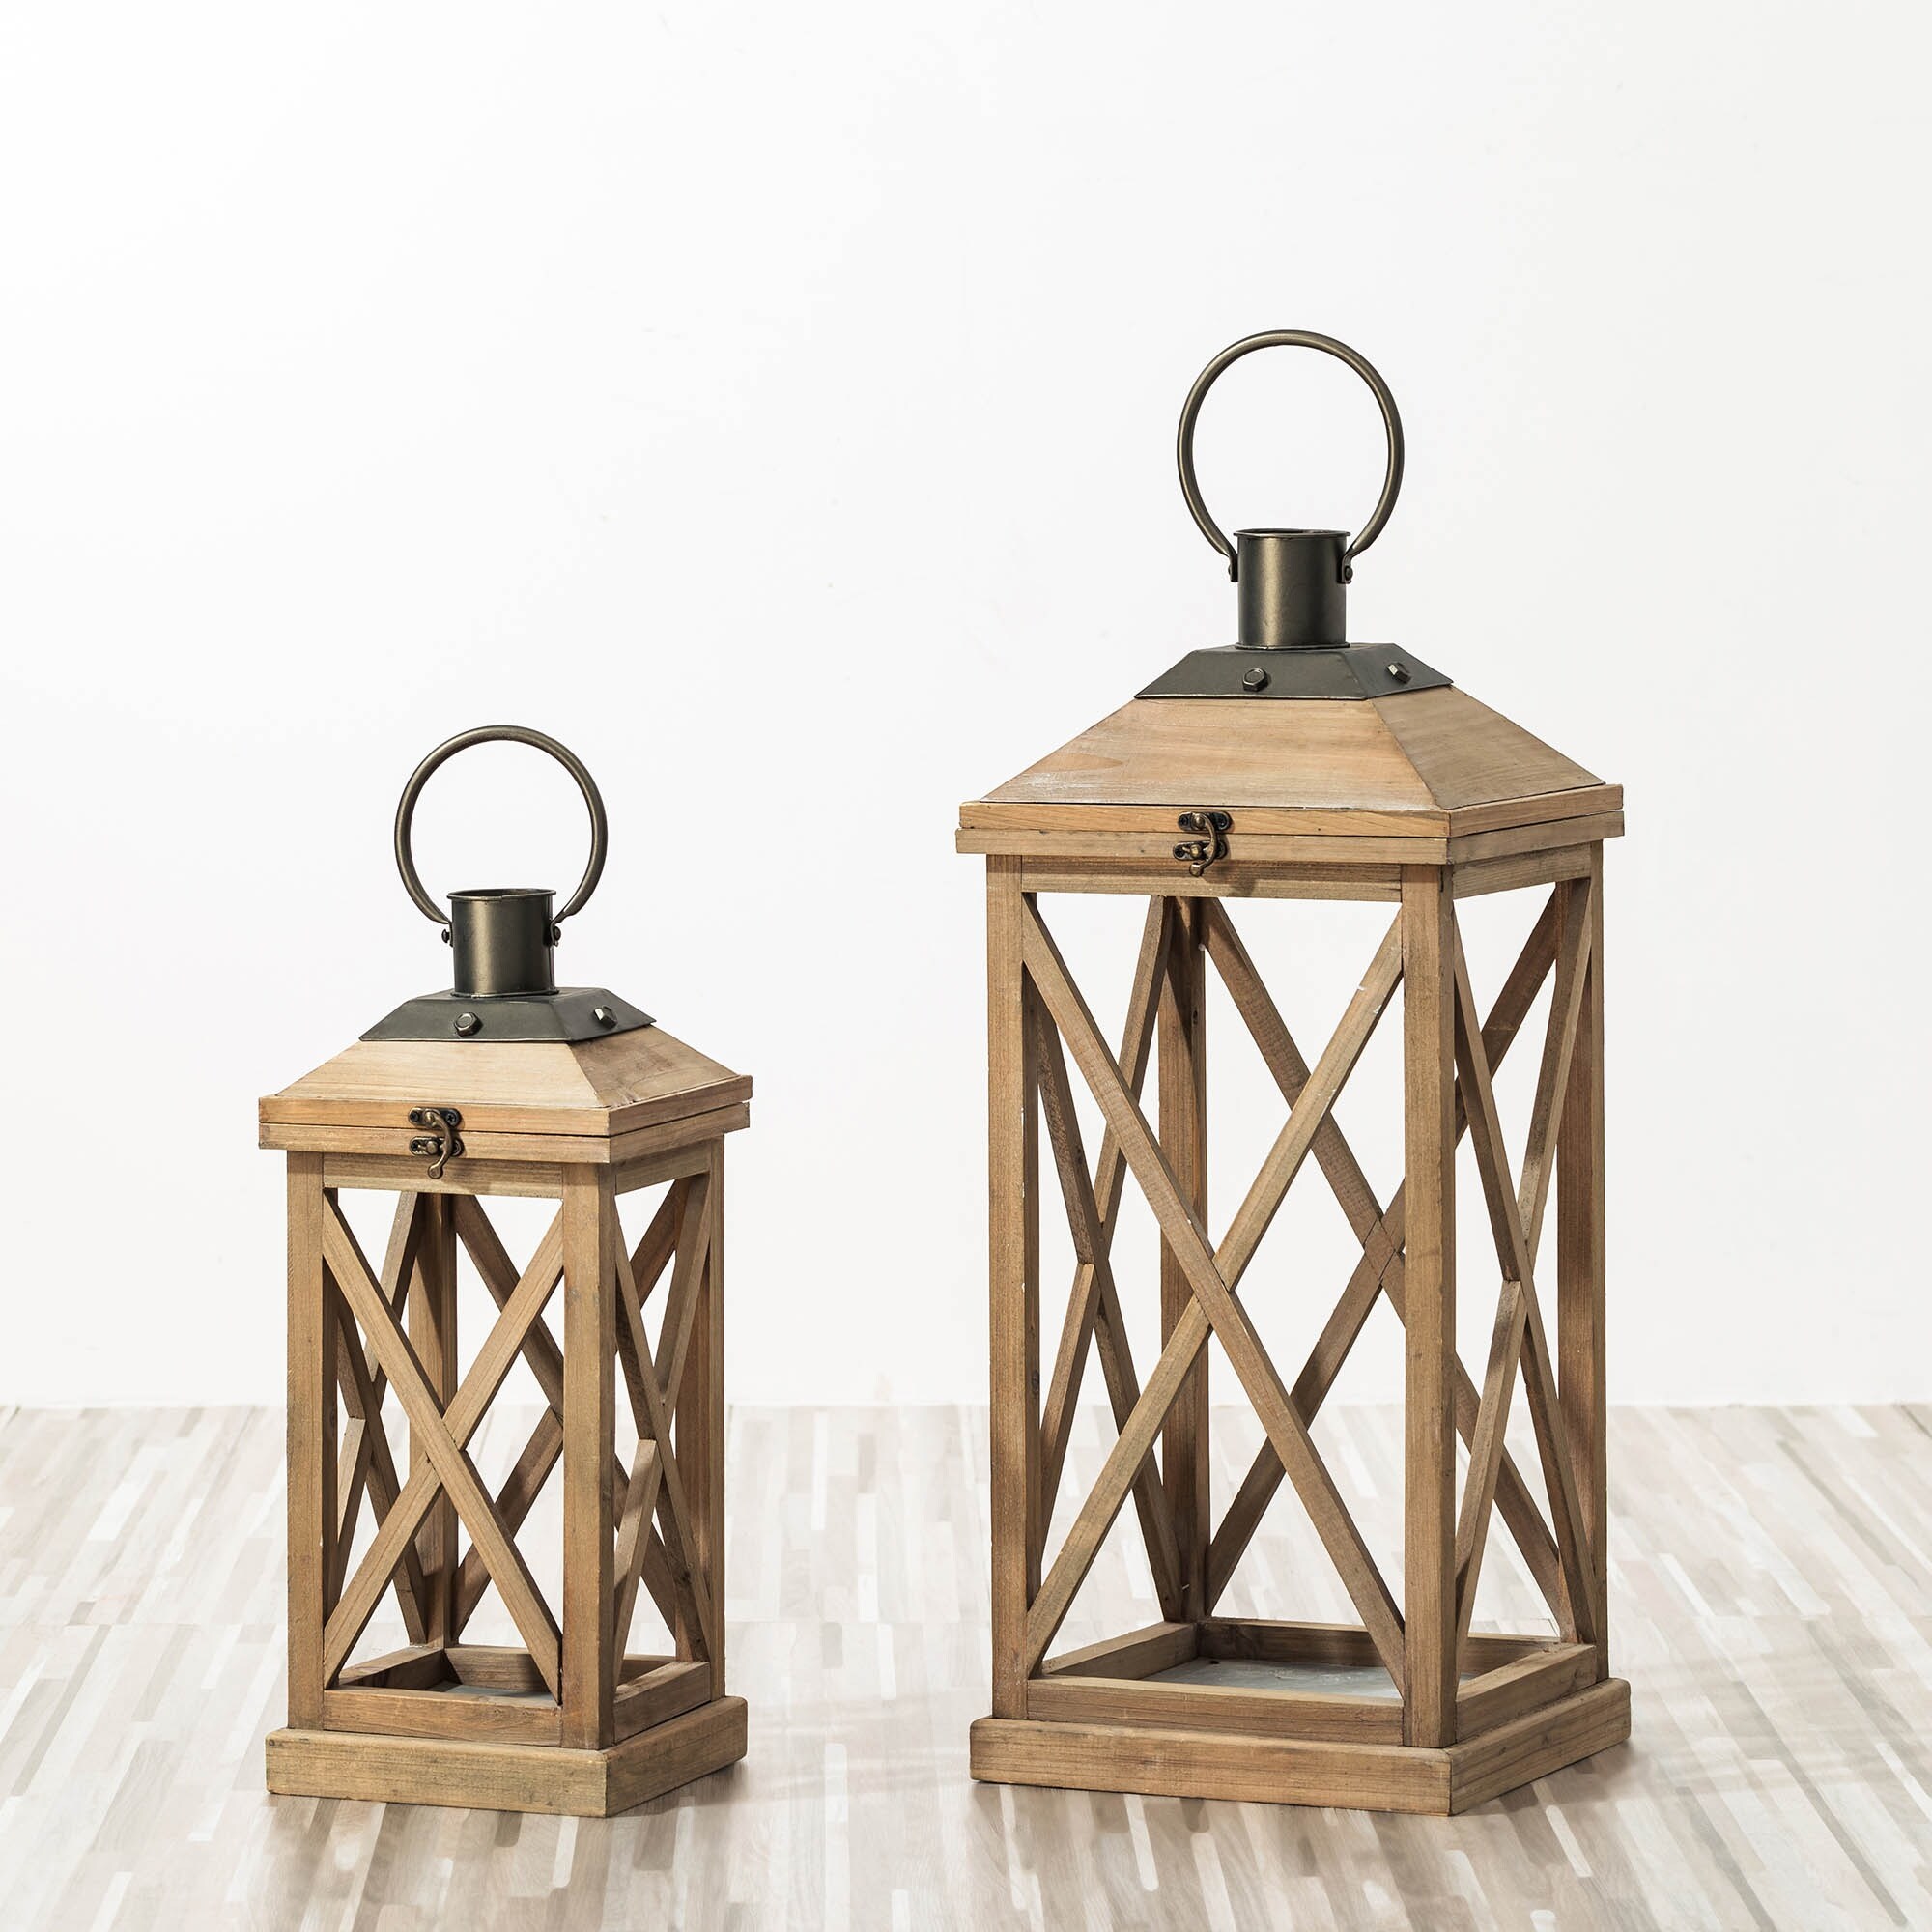 https://ak1.ostkcdn.com/images/products/is/images/direct/85264a23a2cf02c6bbc7ed5ea1b7da29068bd6aa/Glitzhome-Set-of-2-Modern-Simple-Wooden-Lanterns-Hanging-Candle-Holders.jpg